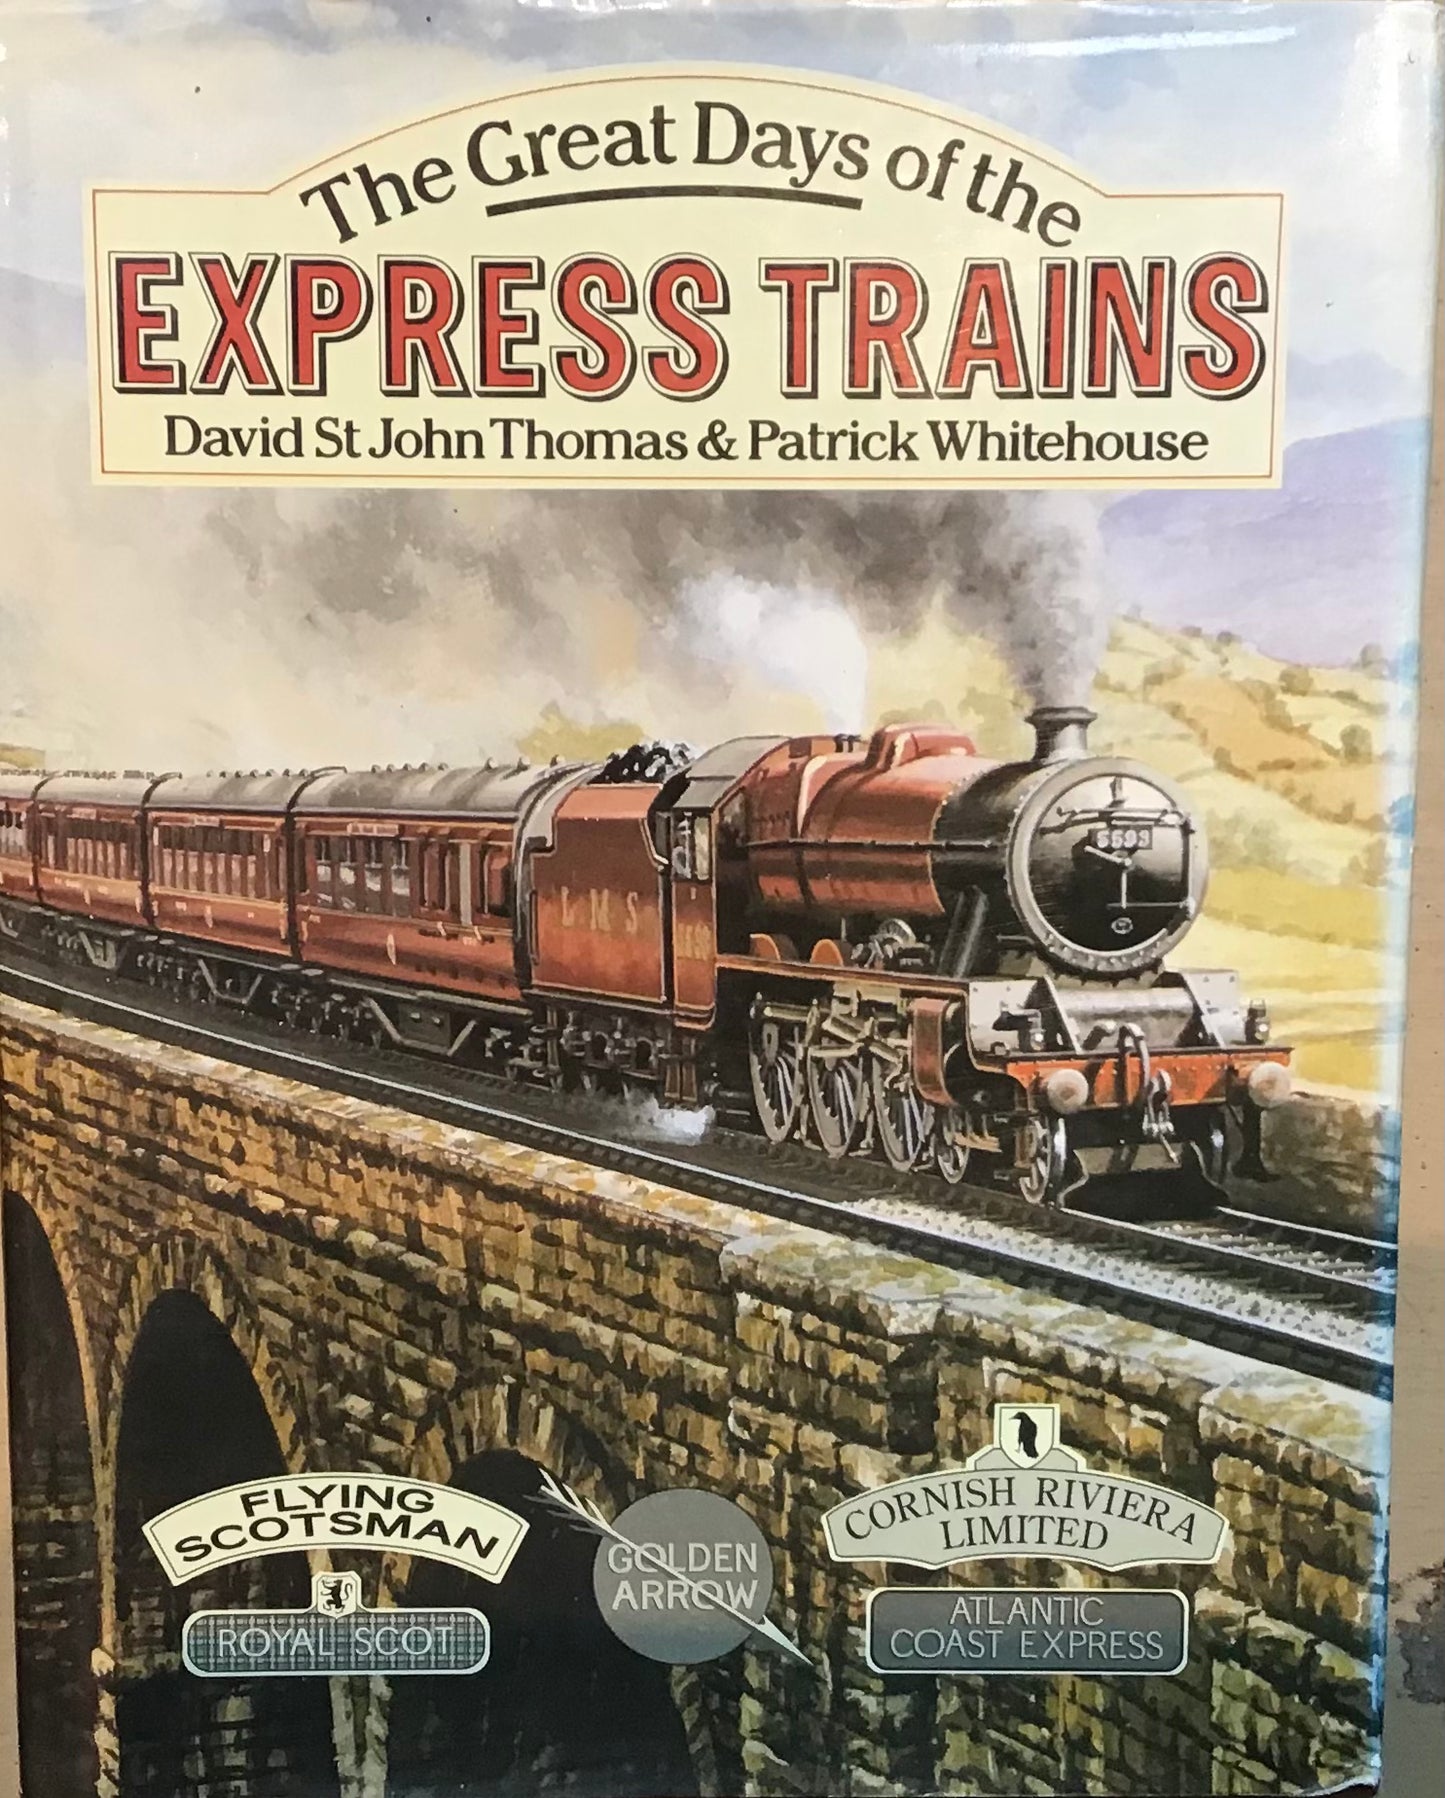 The Great Days of the Express Trains by David St John Thomas & Patrick Whitehouse - Chester Model Centre